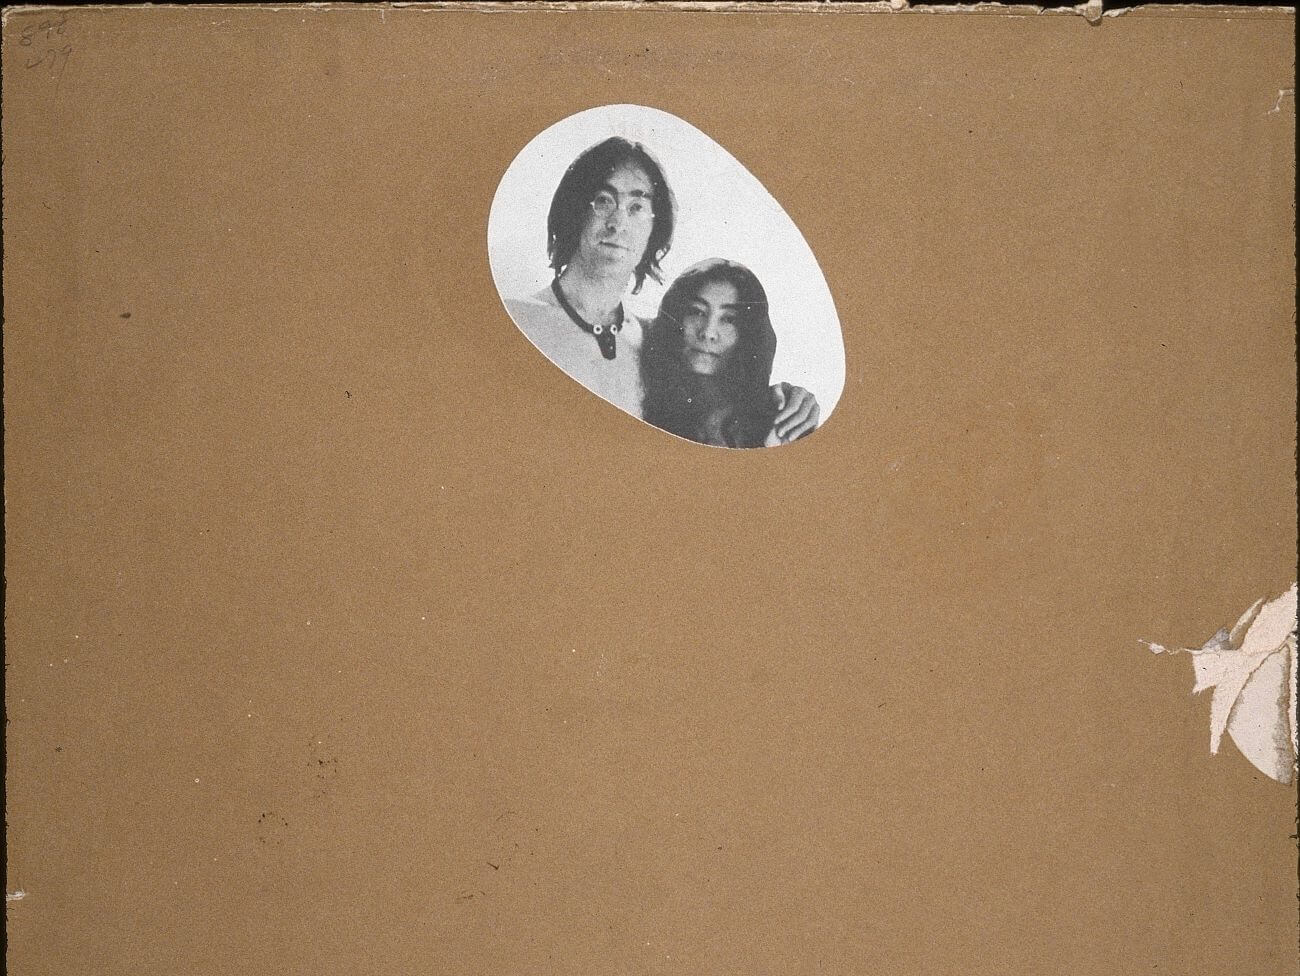 The album of 'Two Virgins' is mostly covered by brown paper except for an oval that reveals John Lennon and Yoko Ono's faces.